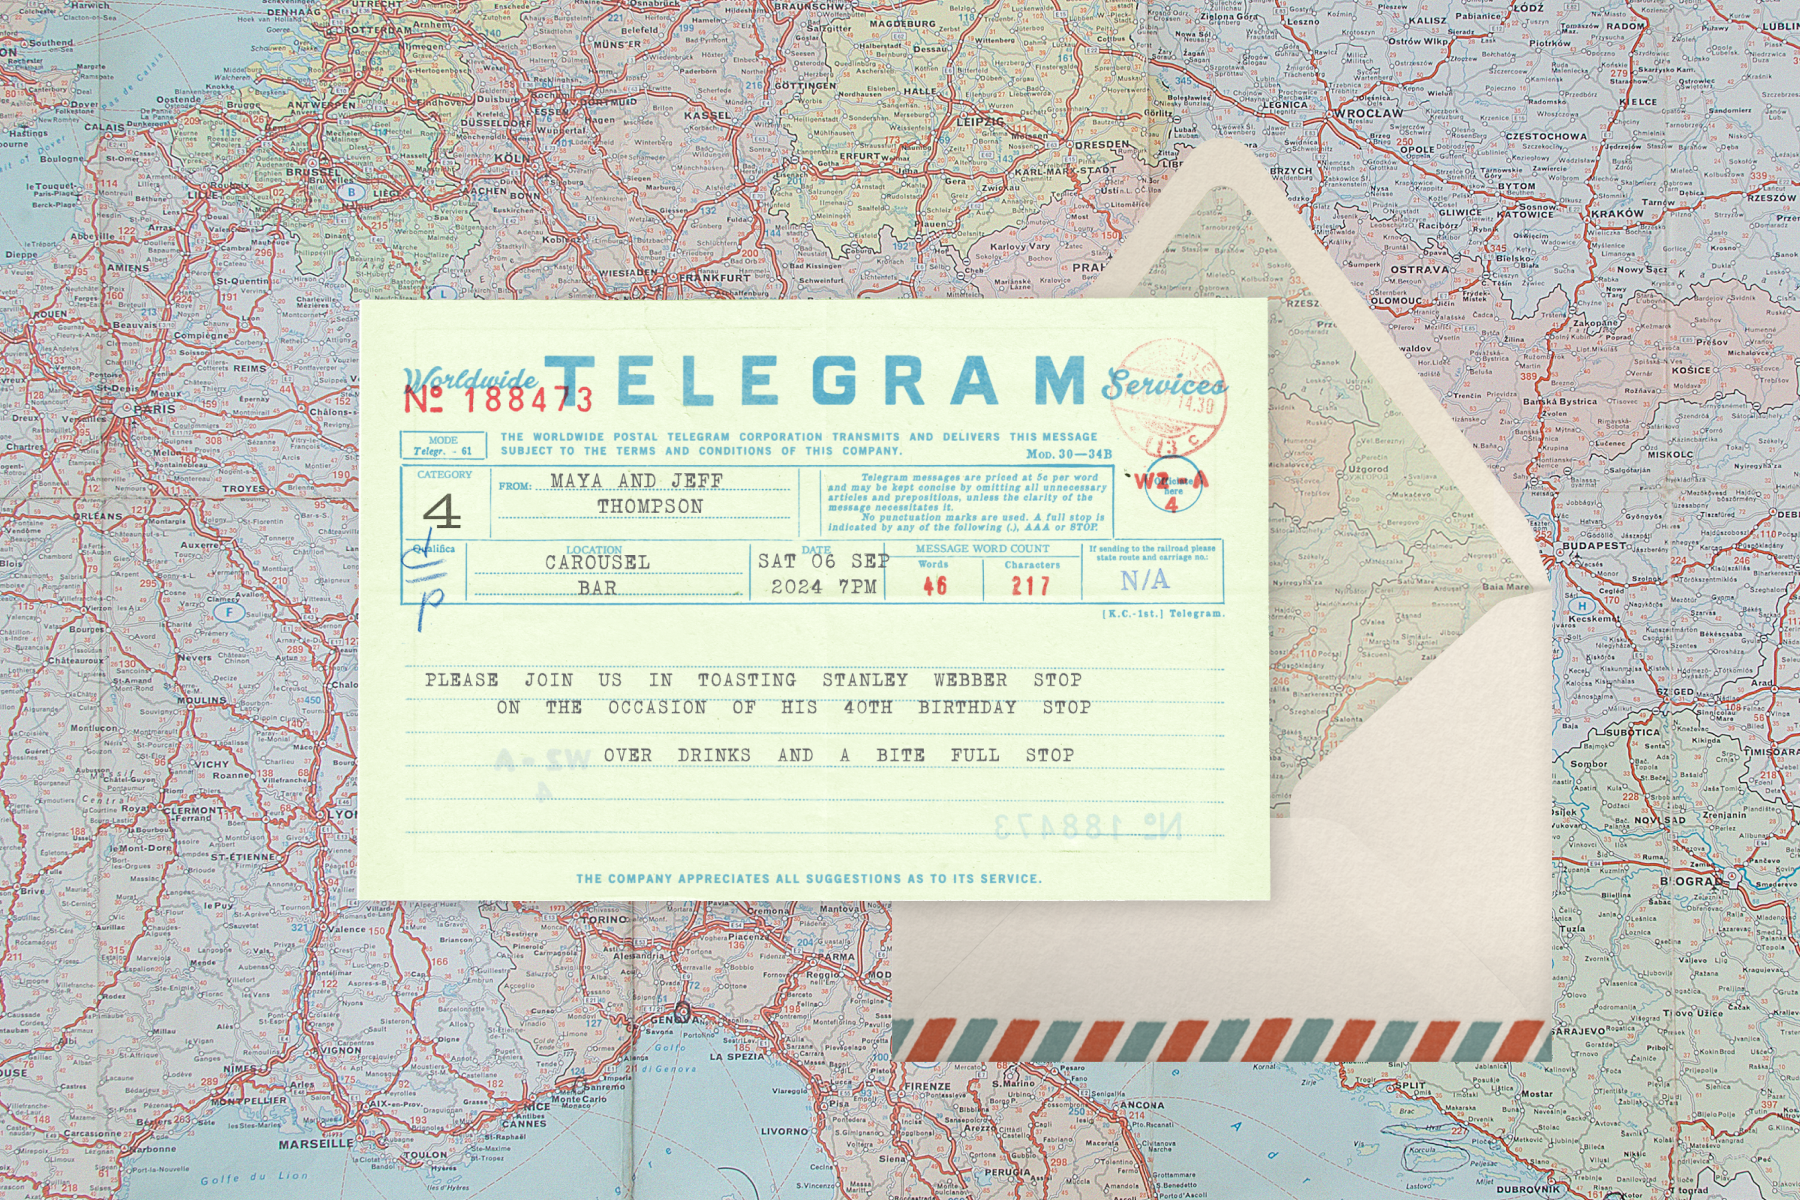 Mint green vintage telegram inspired card with blue text and typewriter font, sitting in front white envelope with blue and red mail stripes on top of a map background